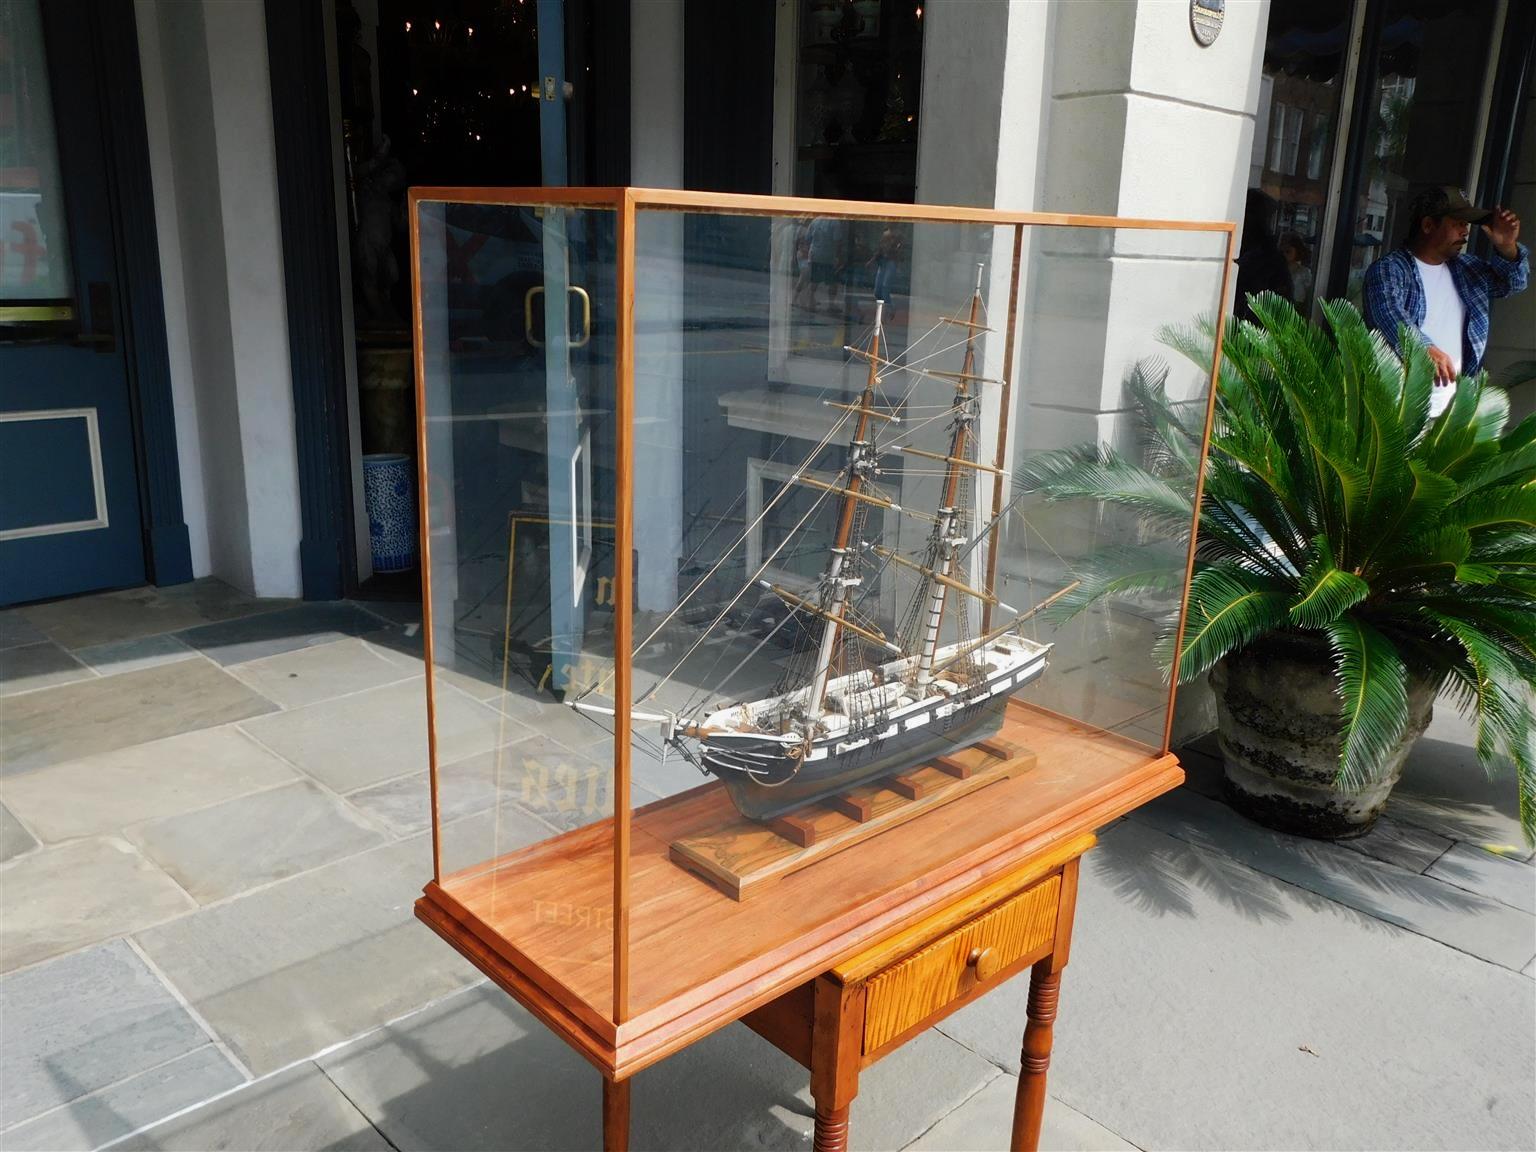 American Naval two masted clipper ship brig model mounted on stand under a glass case. The US Perry was a brig commissioned by the United States Navy October 1843 prior to the American Civil War. She was tasked by the Navy for various missions,